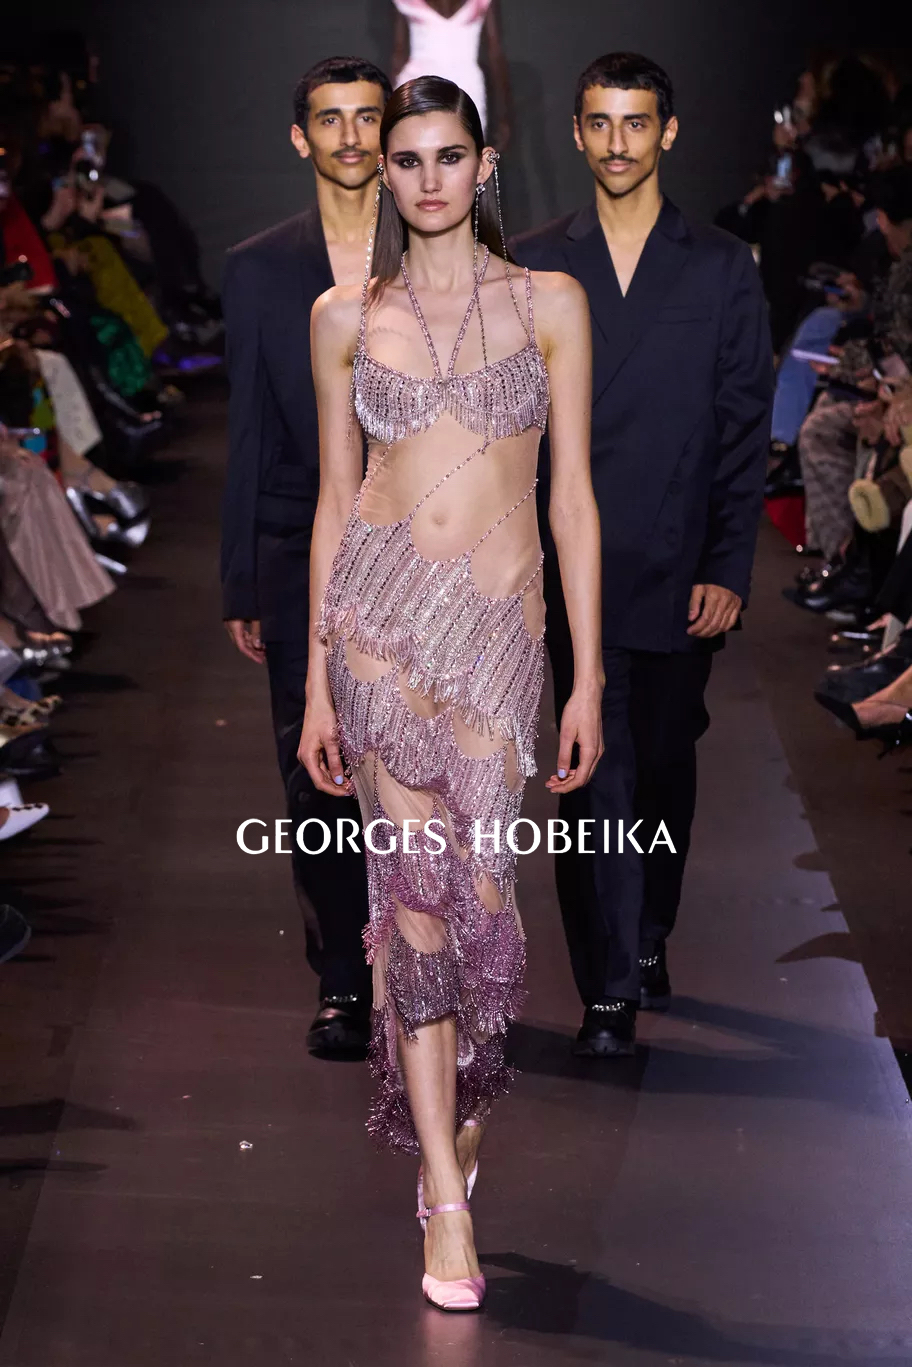 ANA MIGUEL FOR GEORGES HOBEIKA AT HAUTE COUTURE WEEK SPRING SUMMER 23